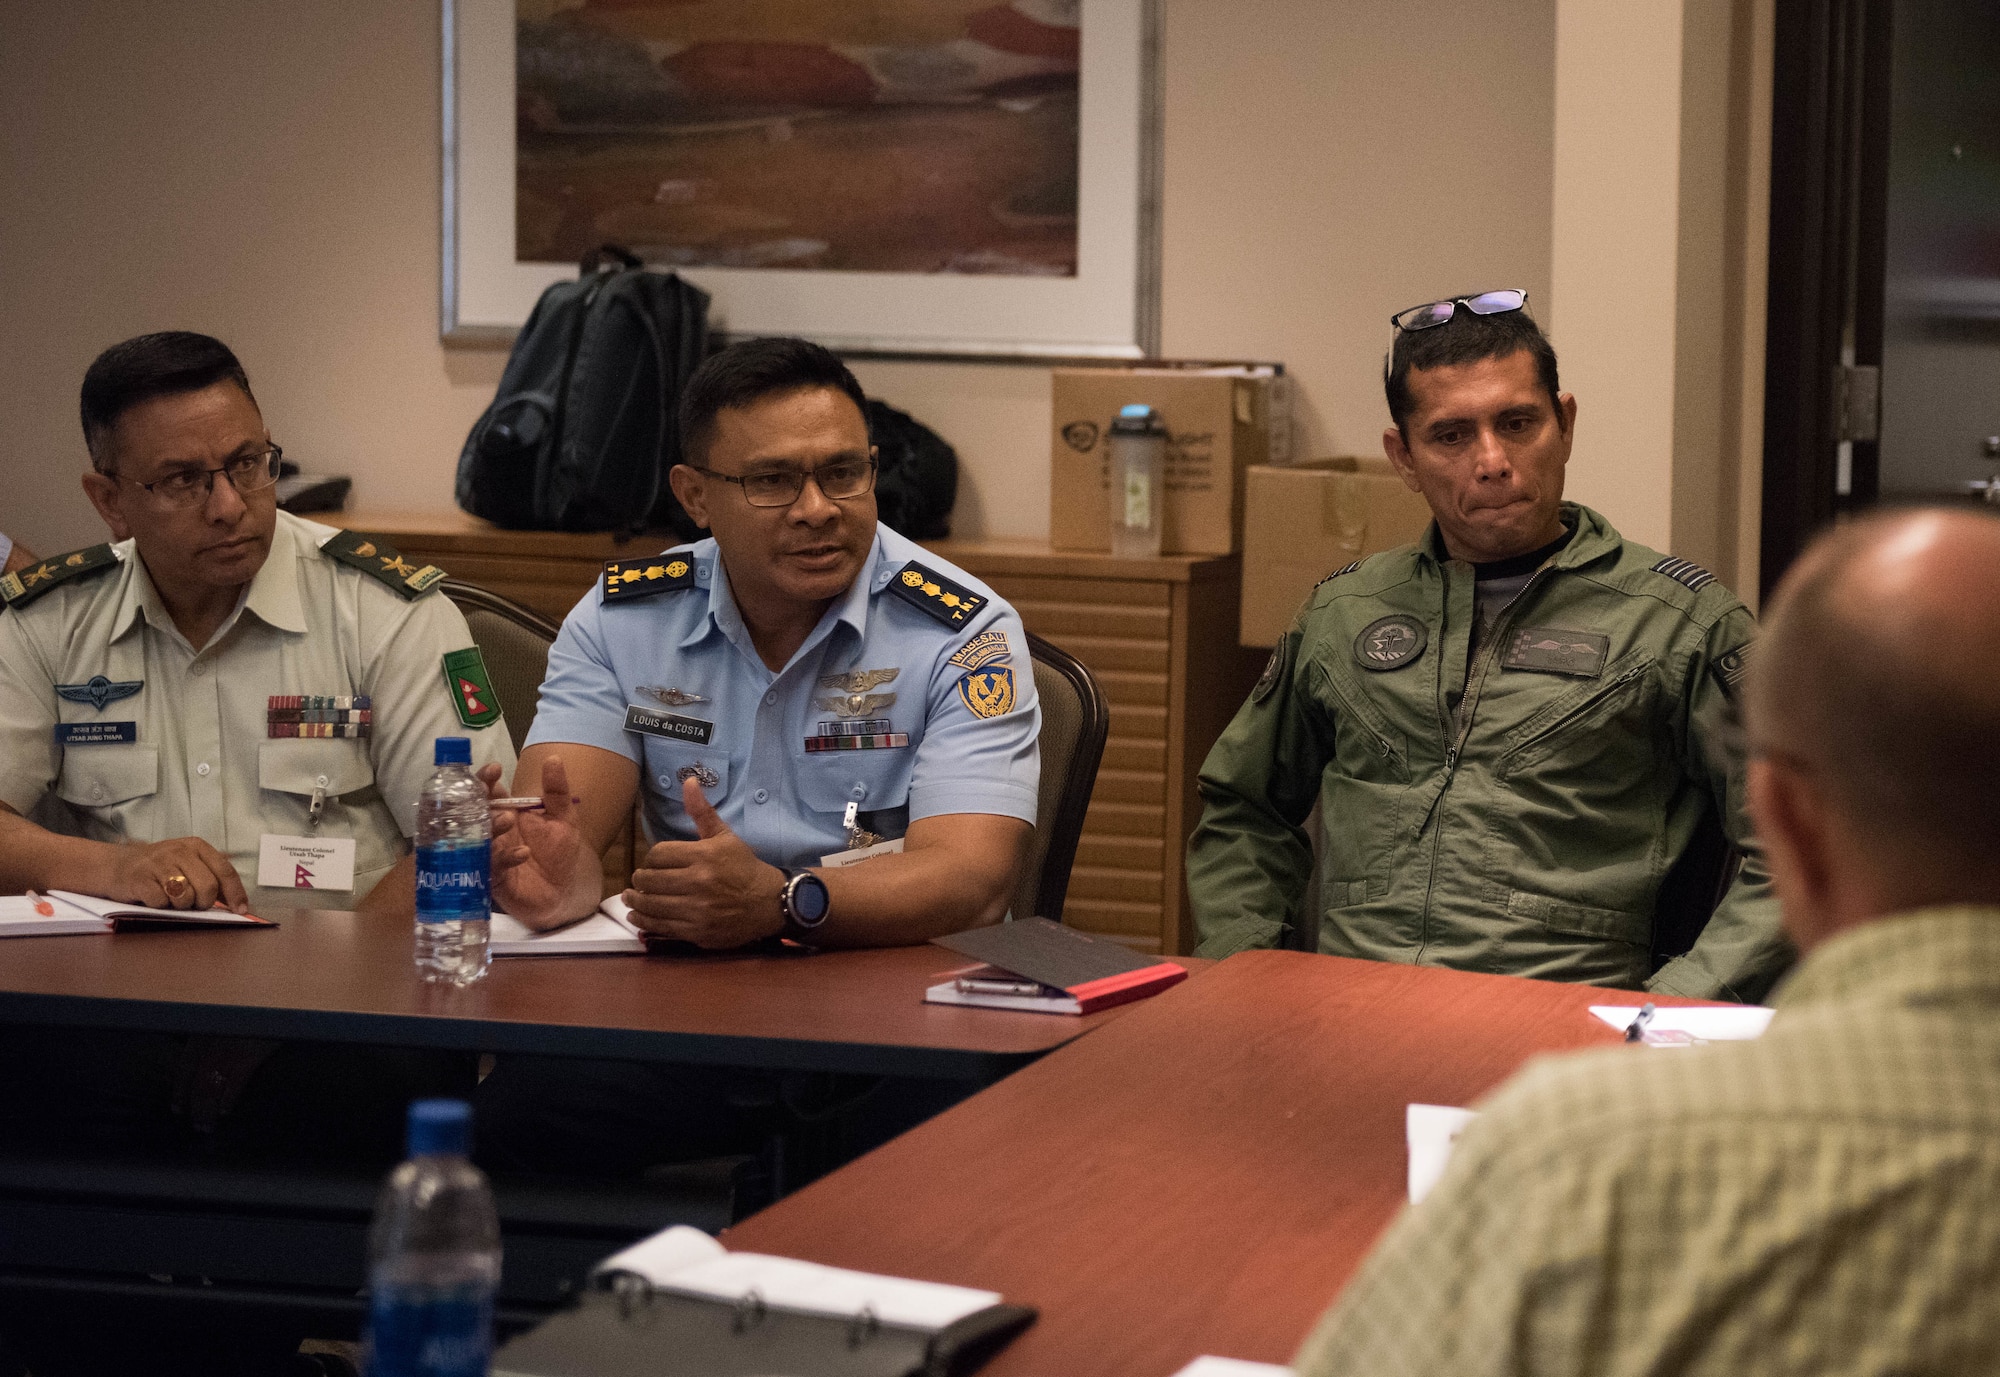 Attendees at the Indo-Pacific Safety Air Forces Exchange have a round-table discussion on aviation safety topics in Waikiki, Hawaii, Aug. 20, 2019.